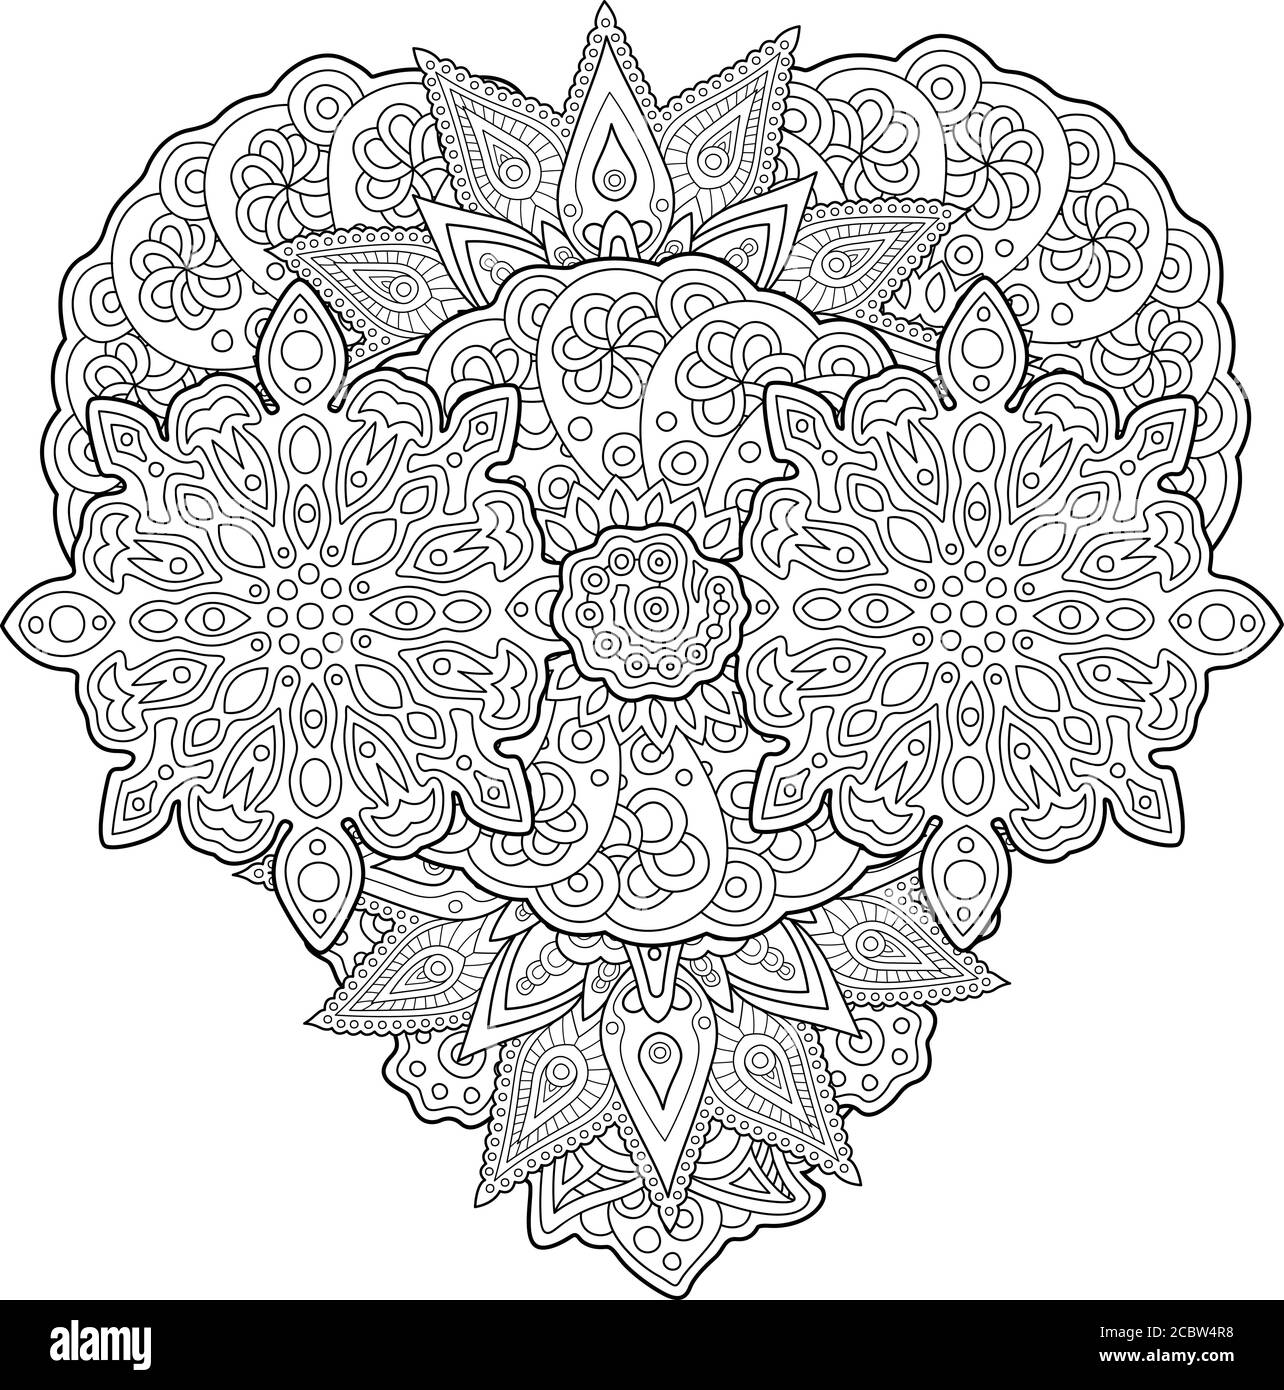 Adult coloring book page with abstract detailed pattern in the shape of heart on white background Stock Vector